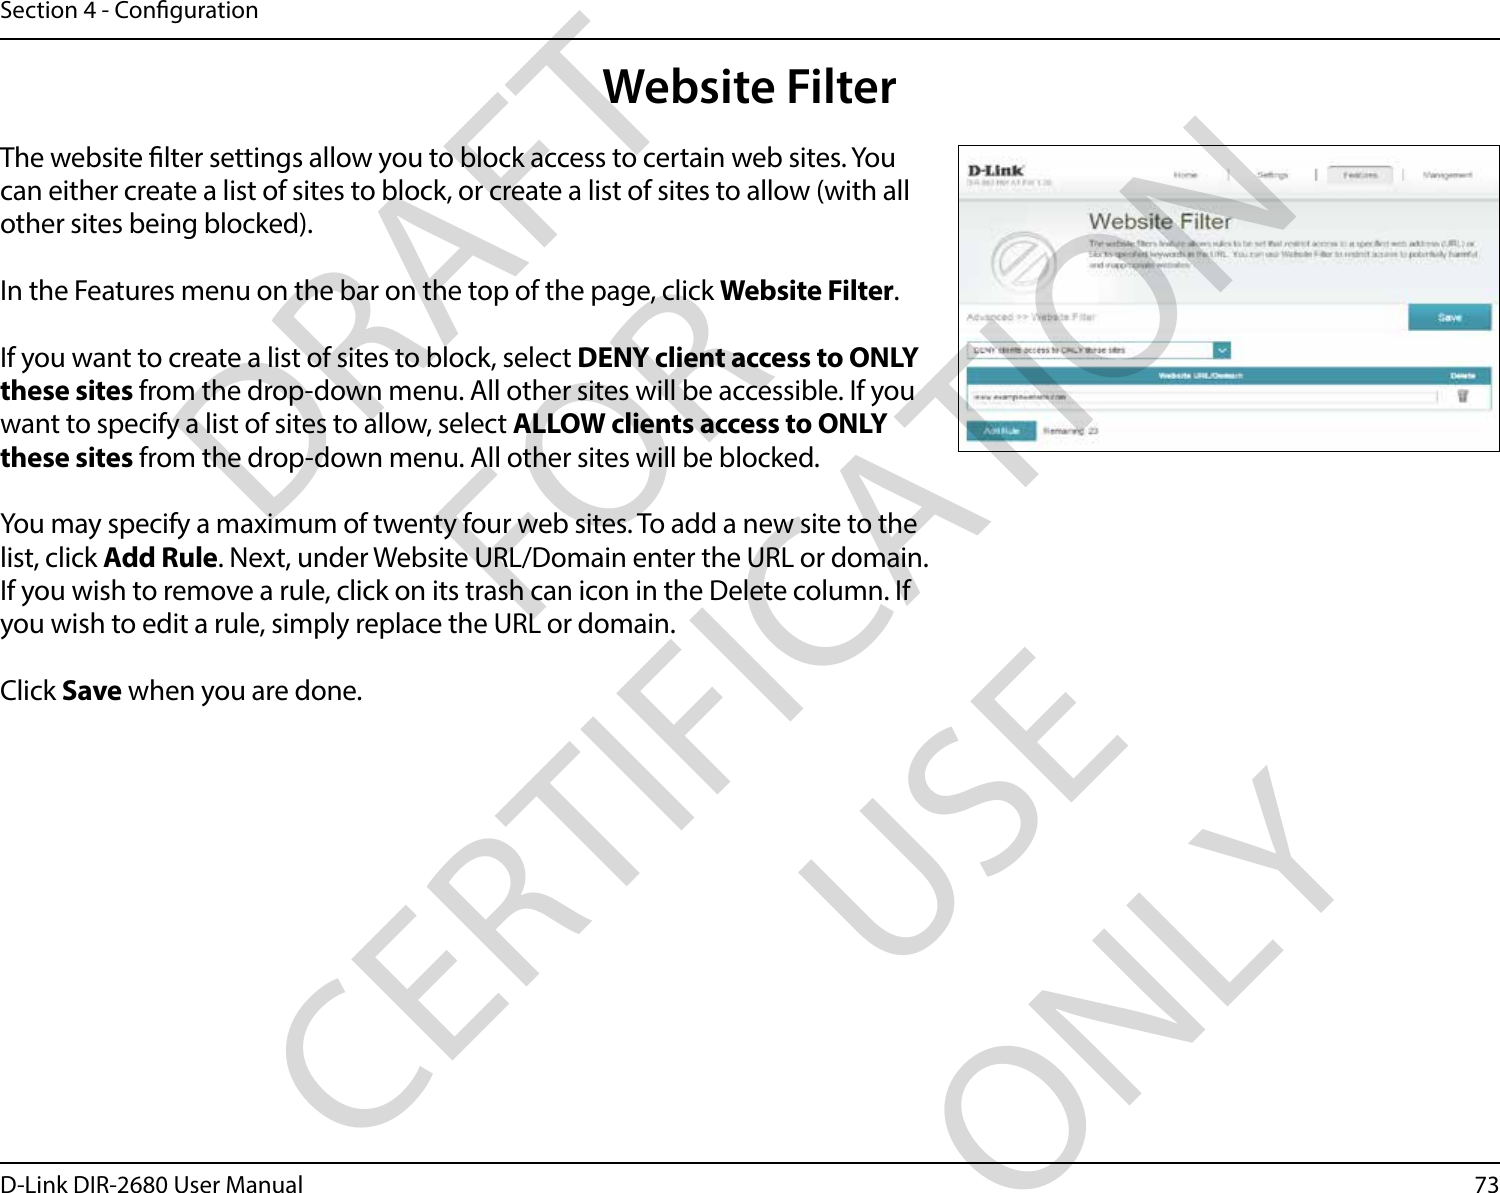 73D-Link DIR-2680 User ManualSection 4 - CongurationWebsite FilterThe website lter settings allow you to block access to certain web sites. You can either create a list of sites to block, or create a list of sites to allow (with all other sites being blocked).In the Features menu on the bar on the top of the page, click Website Filter.If you want to create a list of sites to block, select DENY client access to ONLY these sites from the drop-down menu. All other sites will be accessible. If you want to specify a list of sites to allow, select ALLOW clients access to ONLY these sites from the drop-down menu. All other sites will be blocked.You may specify a maximum of twenty four web sites. To add a new site to the list, click Add Rule. Next, under Website URL/Domain enter the URL or domain. If you wish to remove a rule, click on its trash can icon in the Delete column. If you wish to edit a rule, simply replace the URL or domain.Click Save when you are done.DRAFT FOR CERTIFICATION USE ONLY